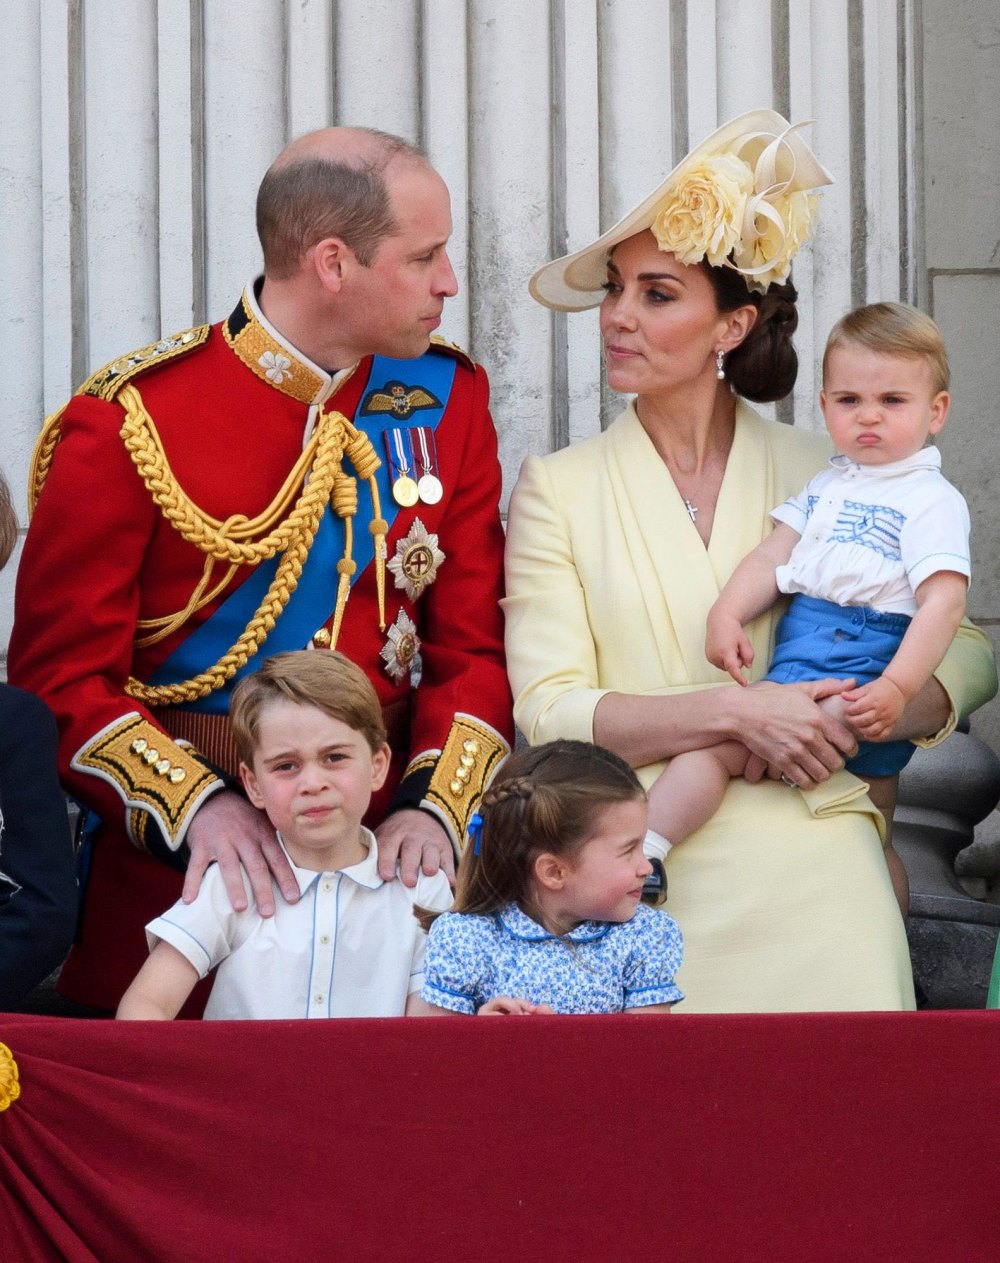 Prince Harry Says He Worries About Prince William and Princess Kate's Kids Becoming the 'Spare'- 'At Least 1 Will End Up Like Me' - 133 Trooping the Colour ceremony, London, UK - 08 Jun 2019